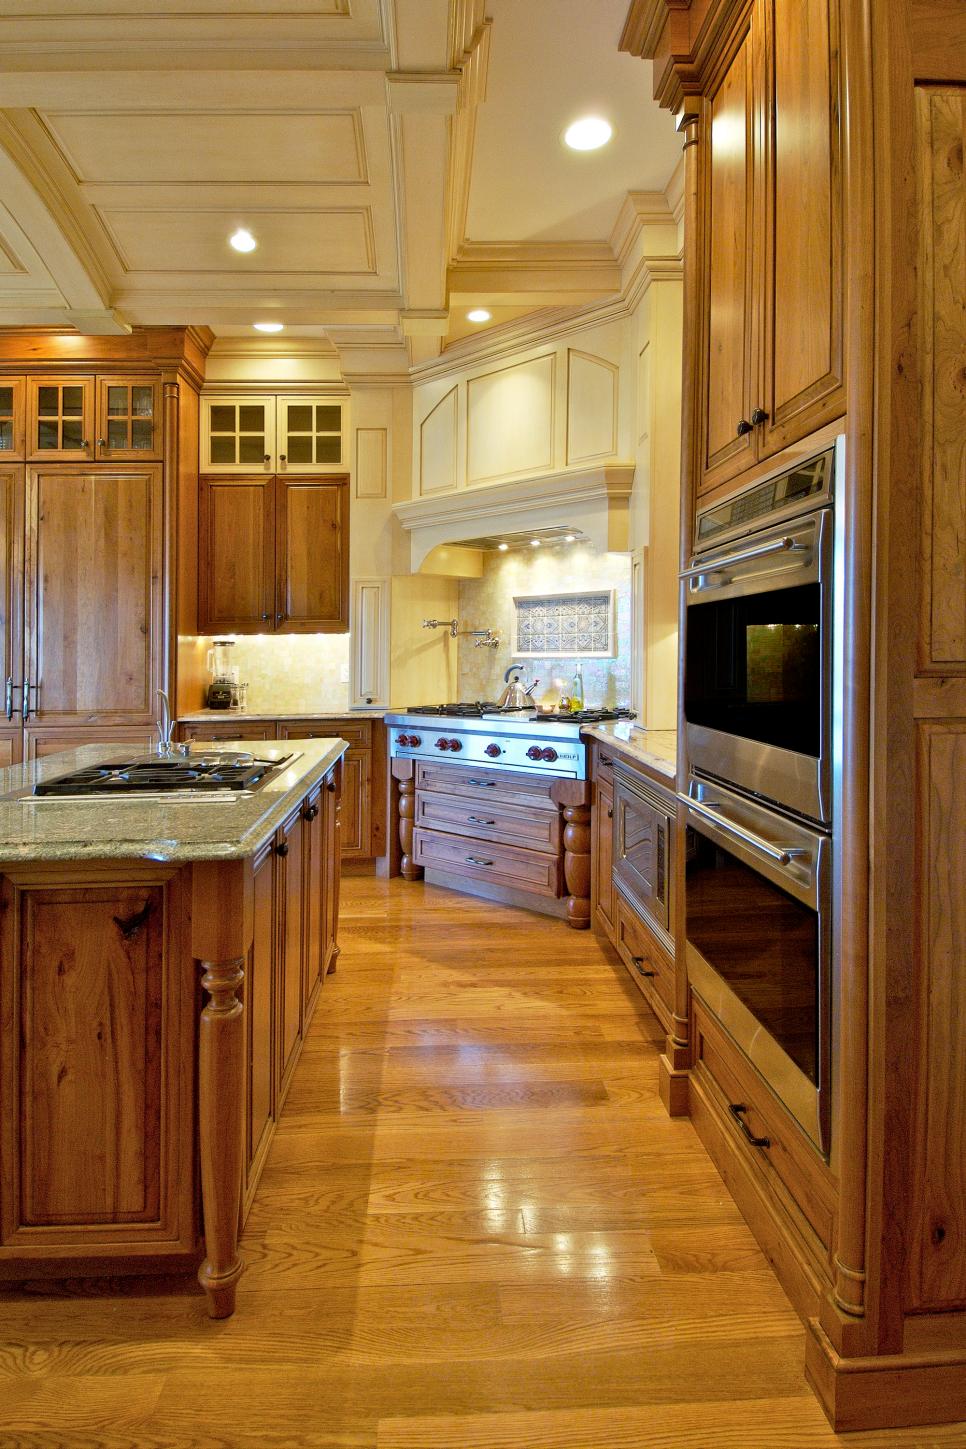 Kitchen Ideas With Wood Cabinets - Image to u